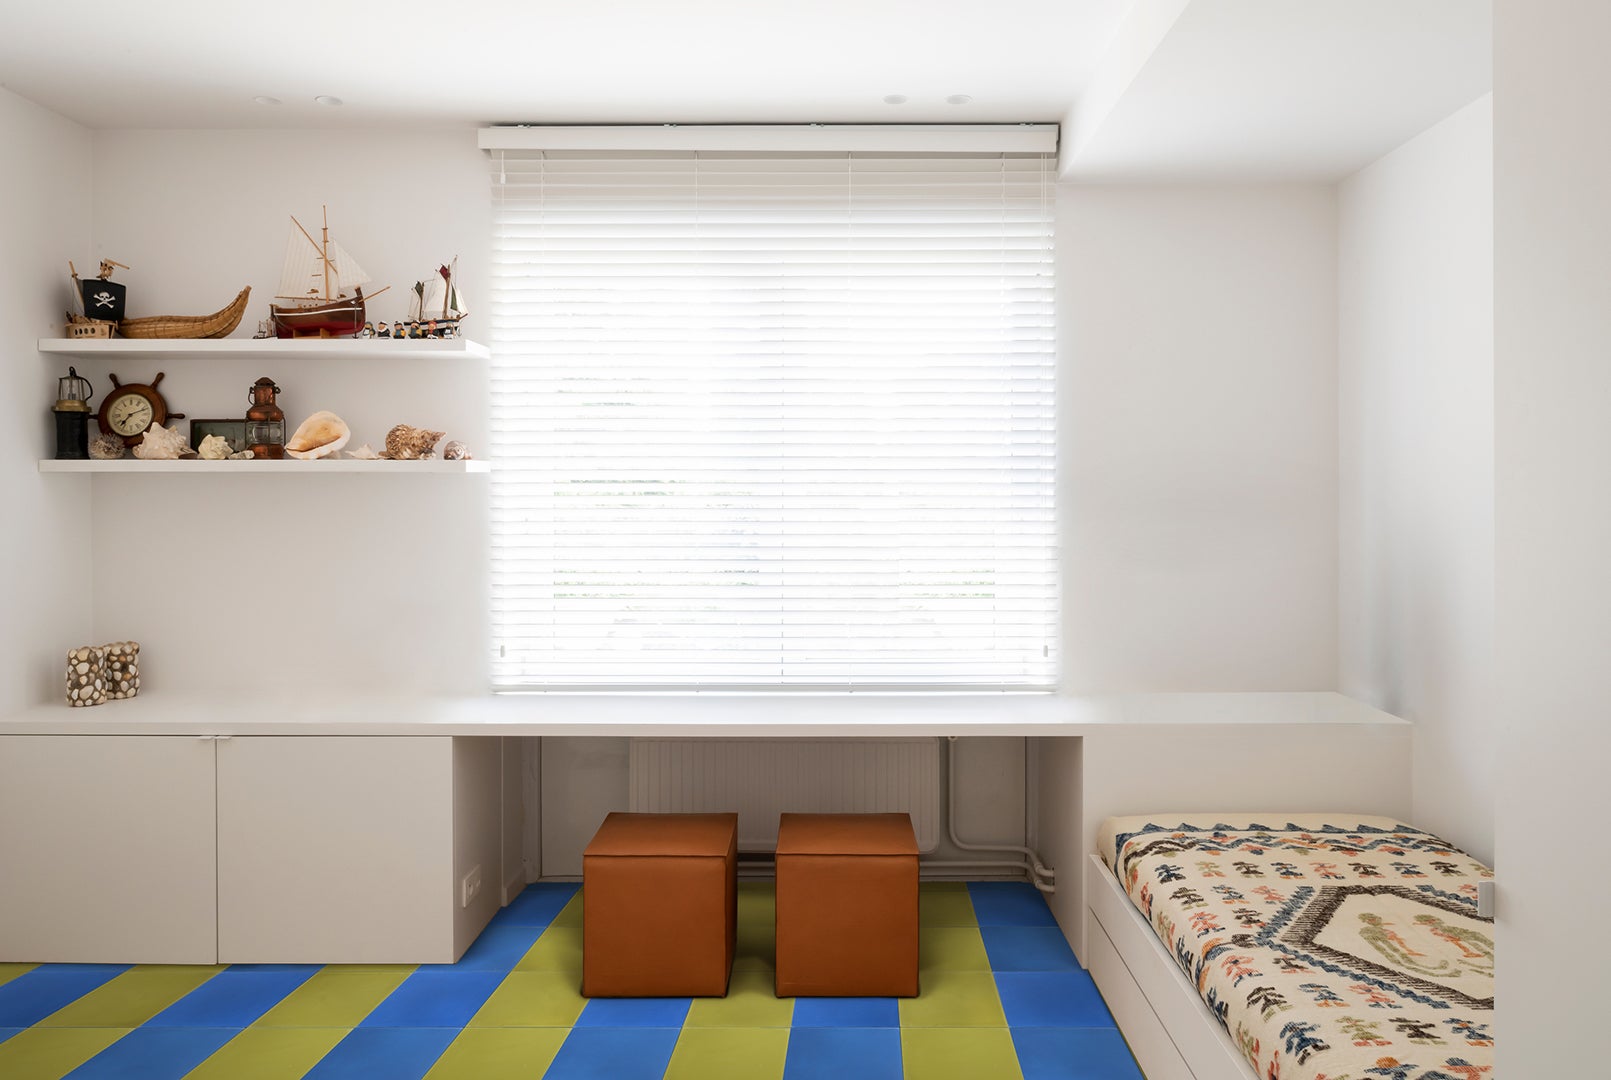 child's bedroom with green and blue striped tile floor.